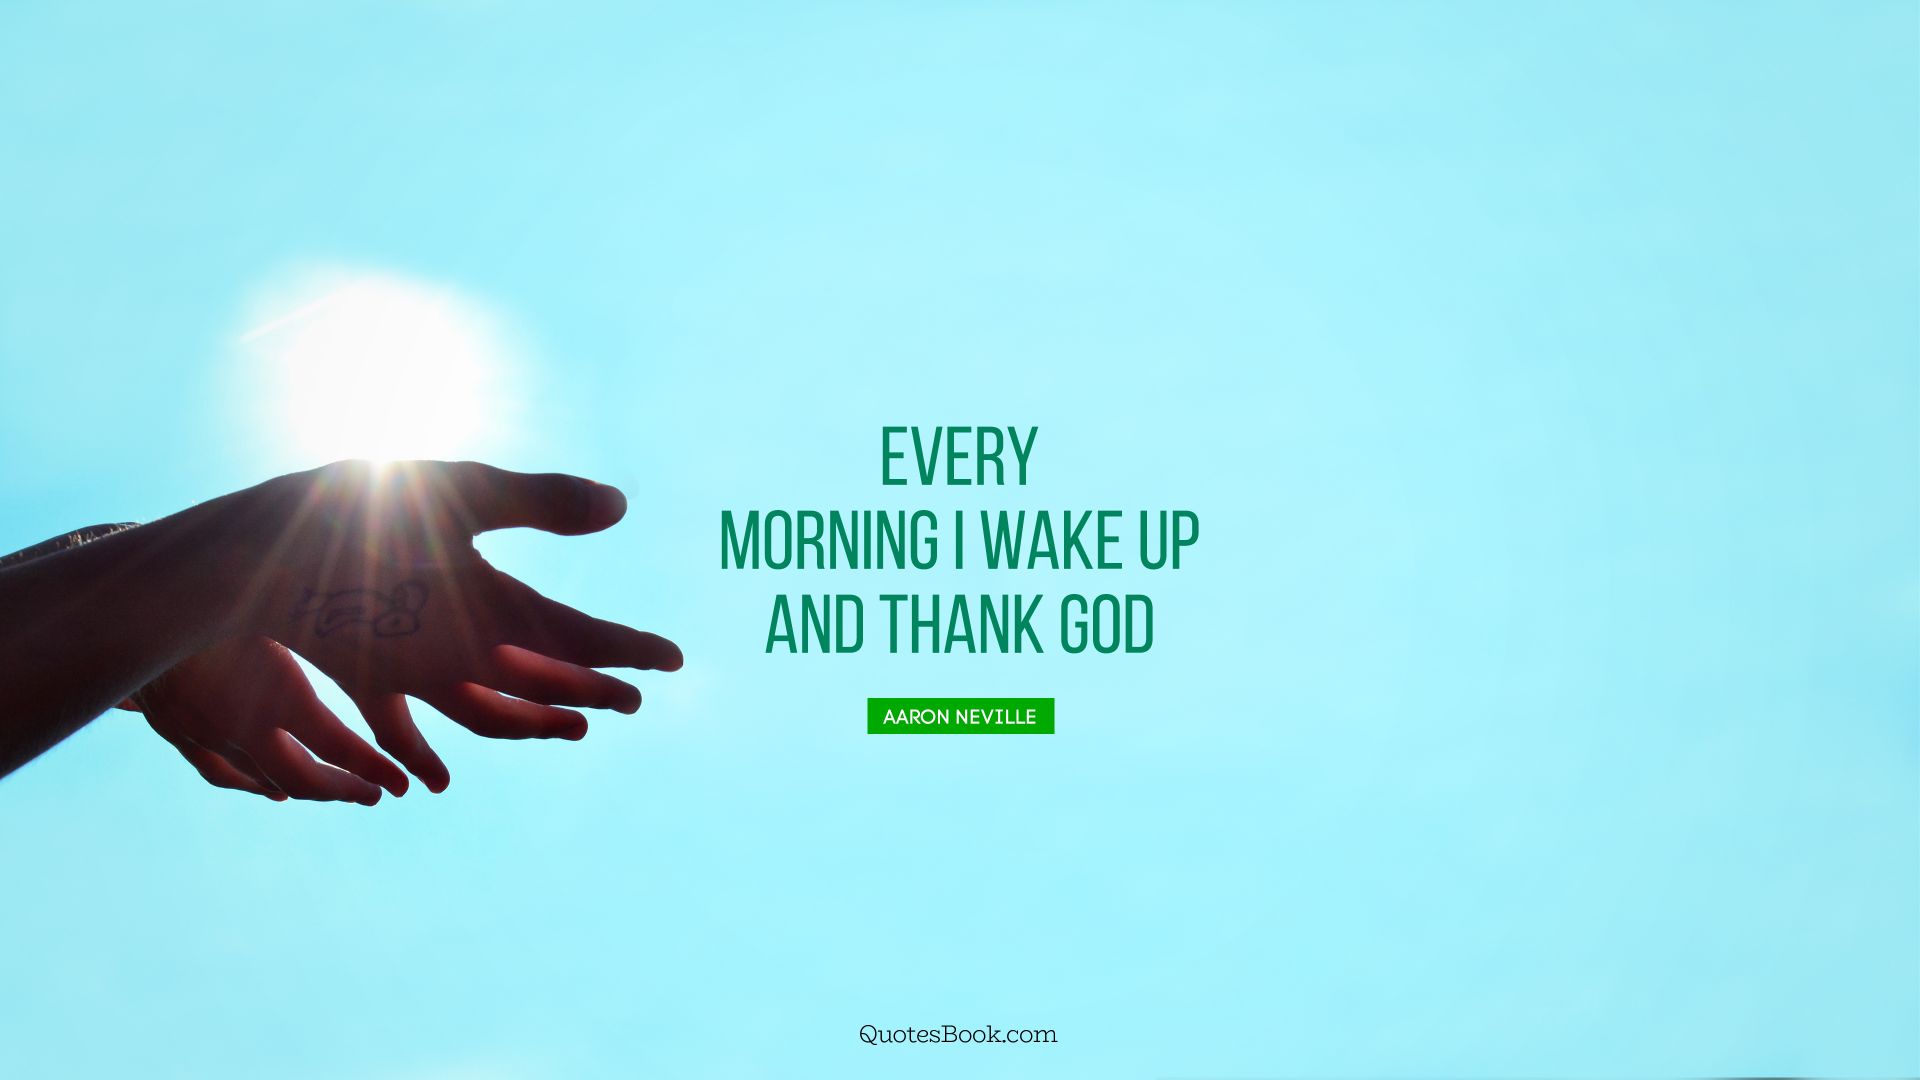 Every morning I wake up and thank God. - Quote by Aaron Neville